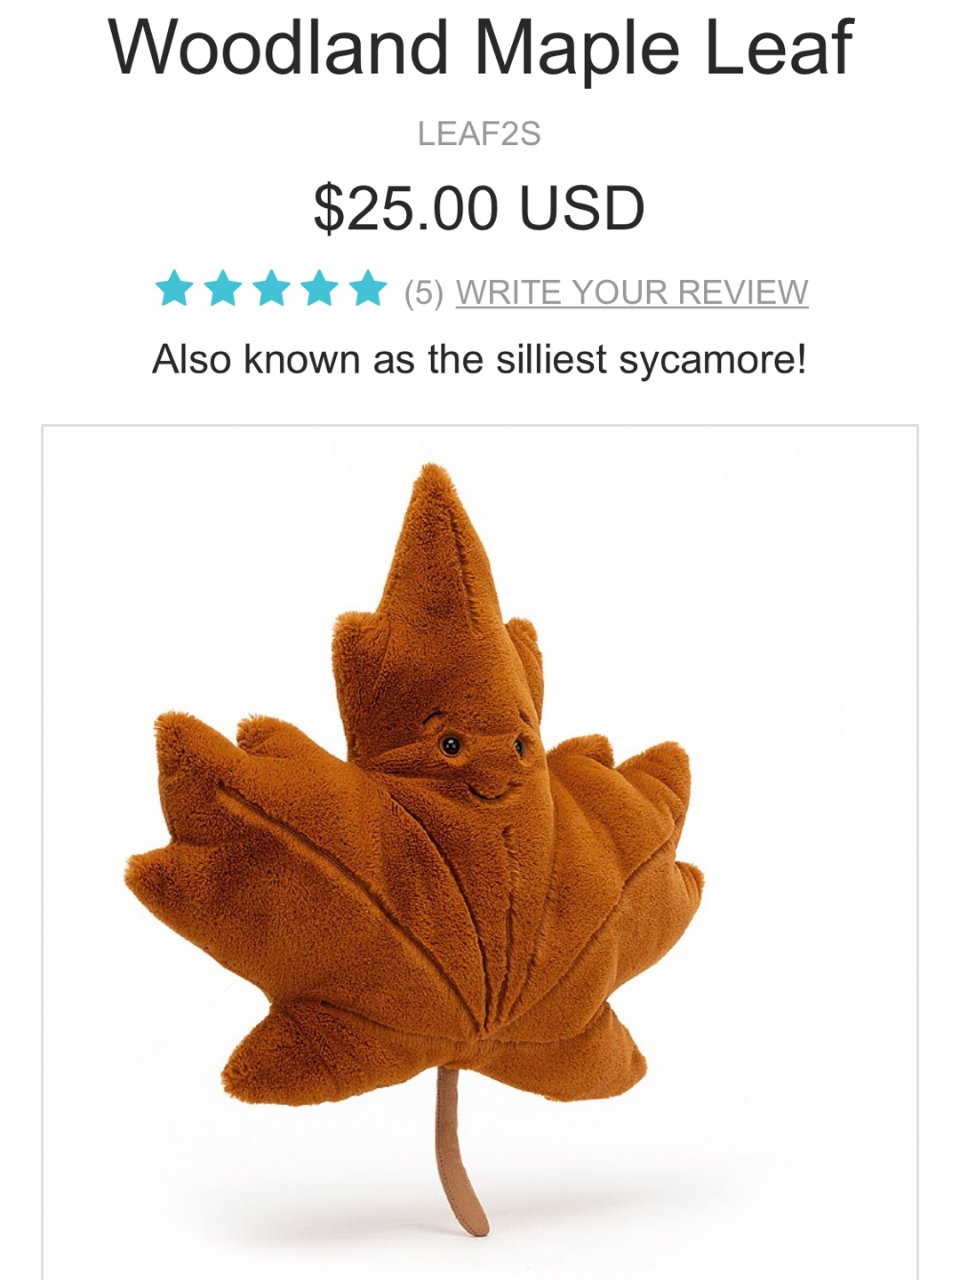 Buy Woodland Maple Leaf - Online at Jellycat.com